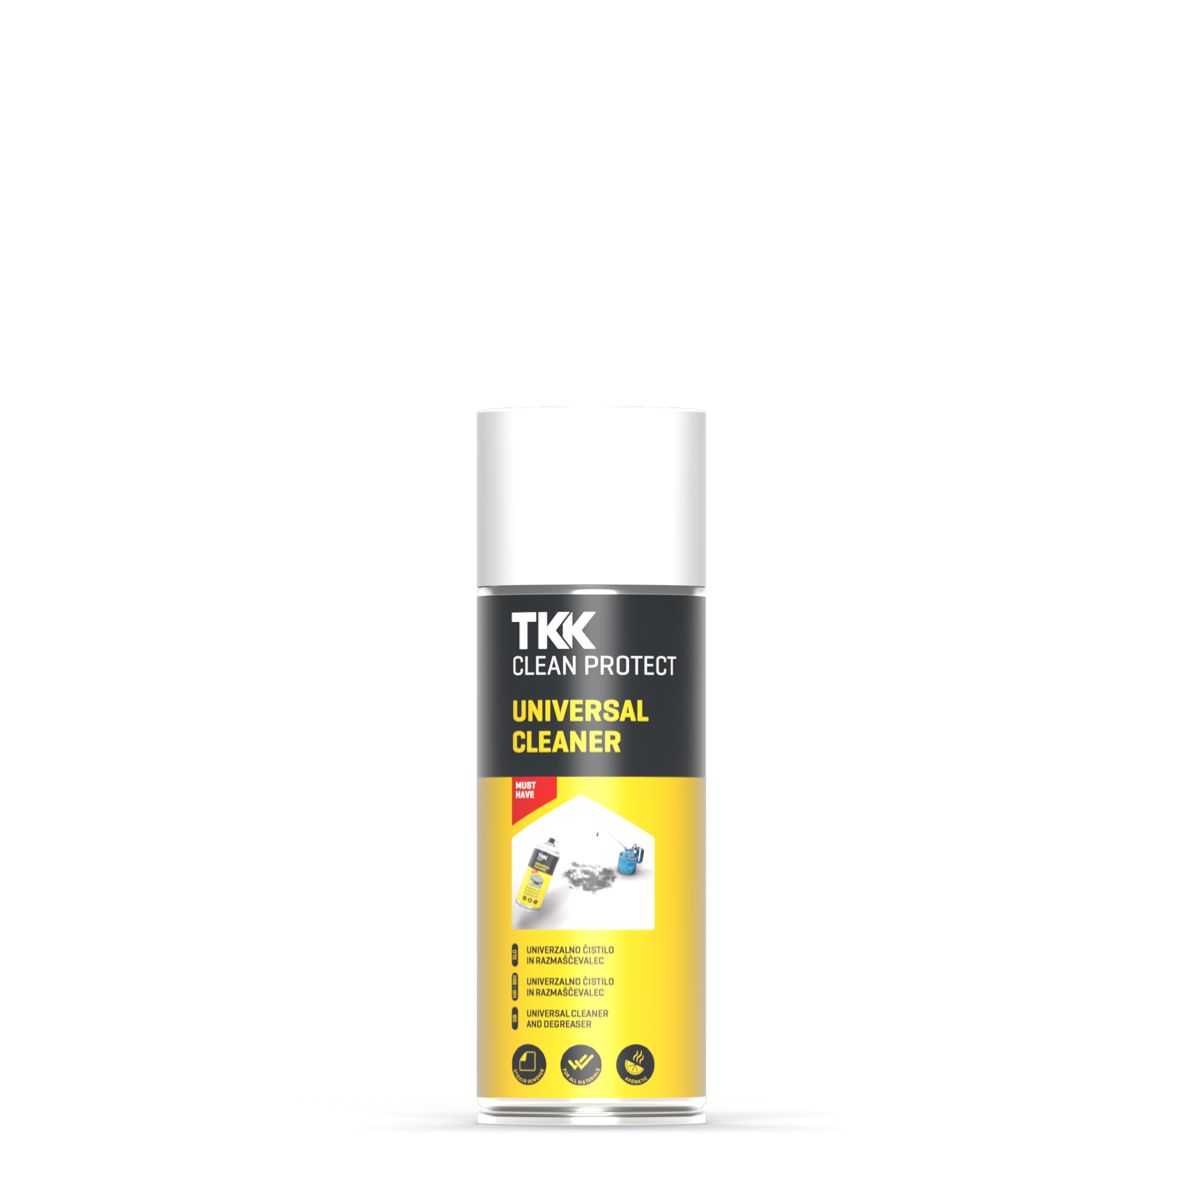 TKK Clean Protect Universal Cleaner